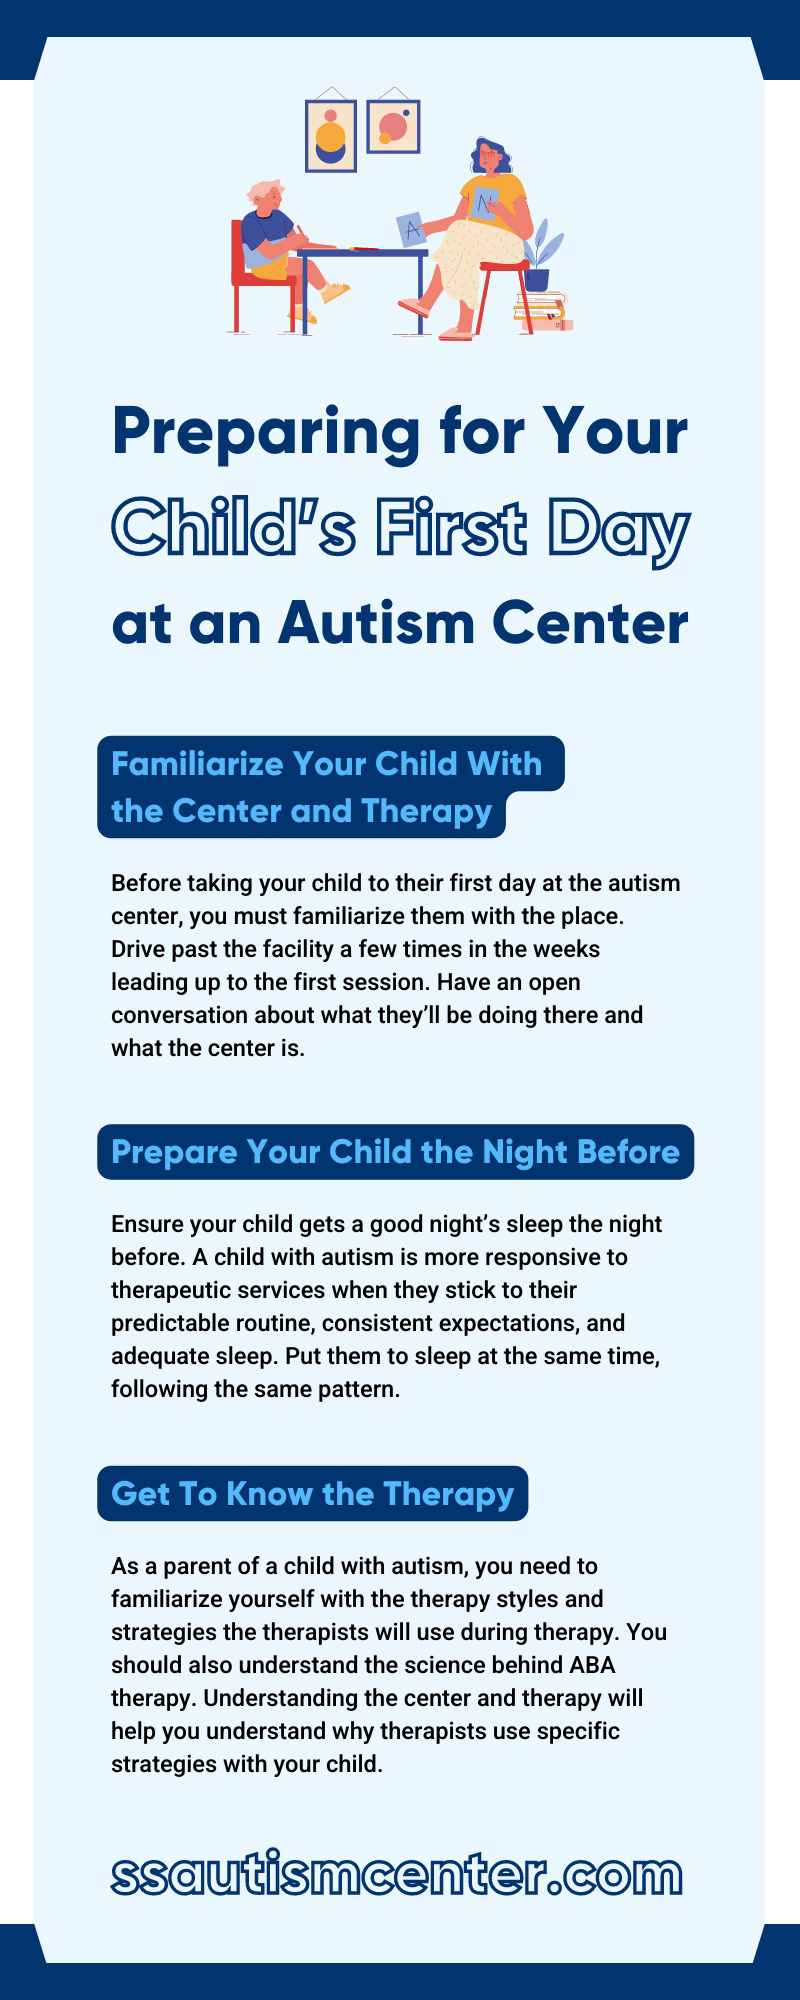 Preparing for Your Child’s First Day at an Autism Center
